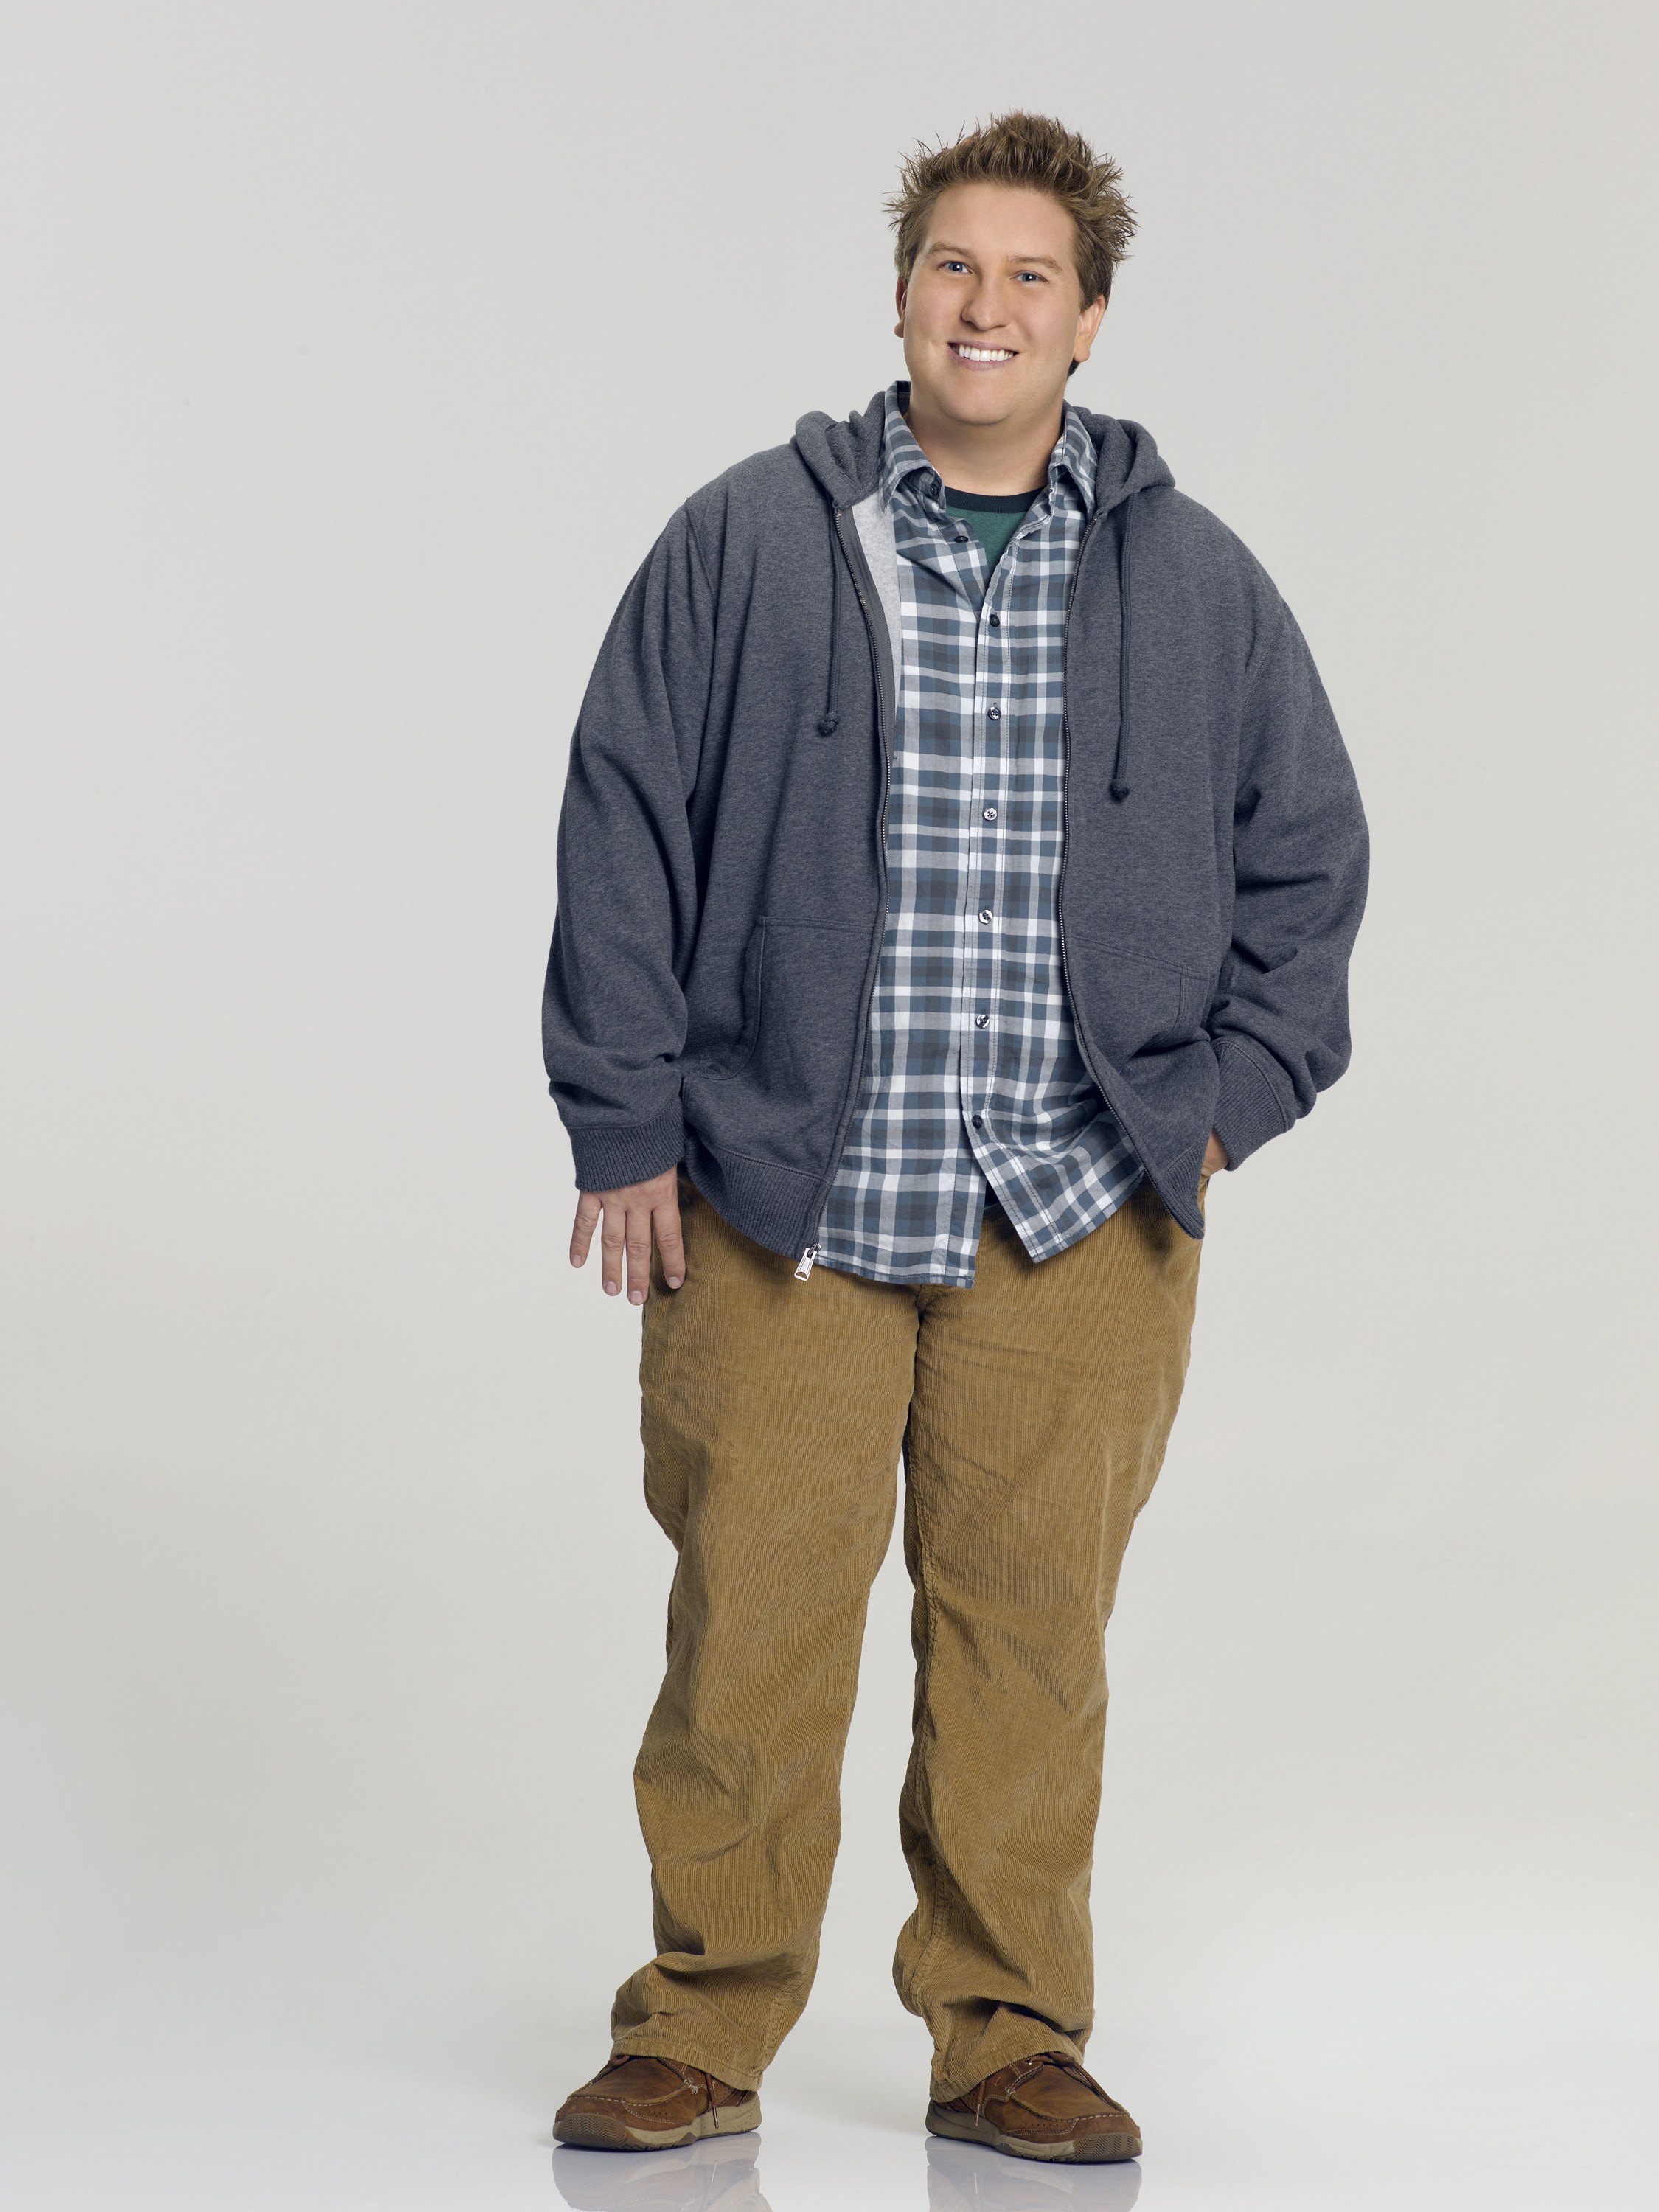 nate-torrence-quotes